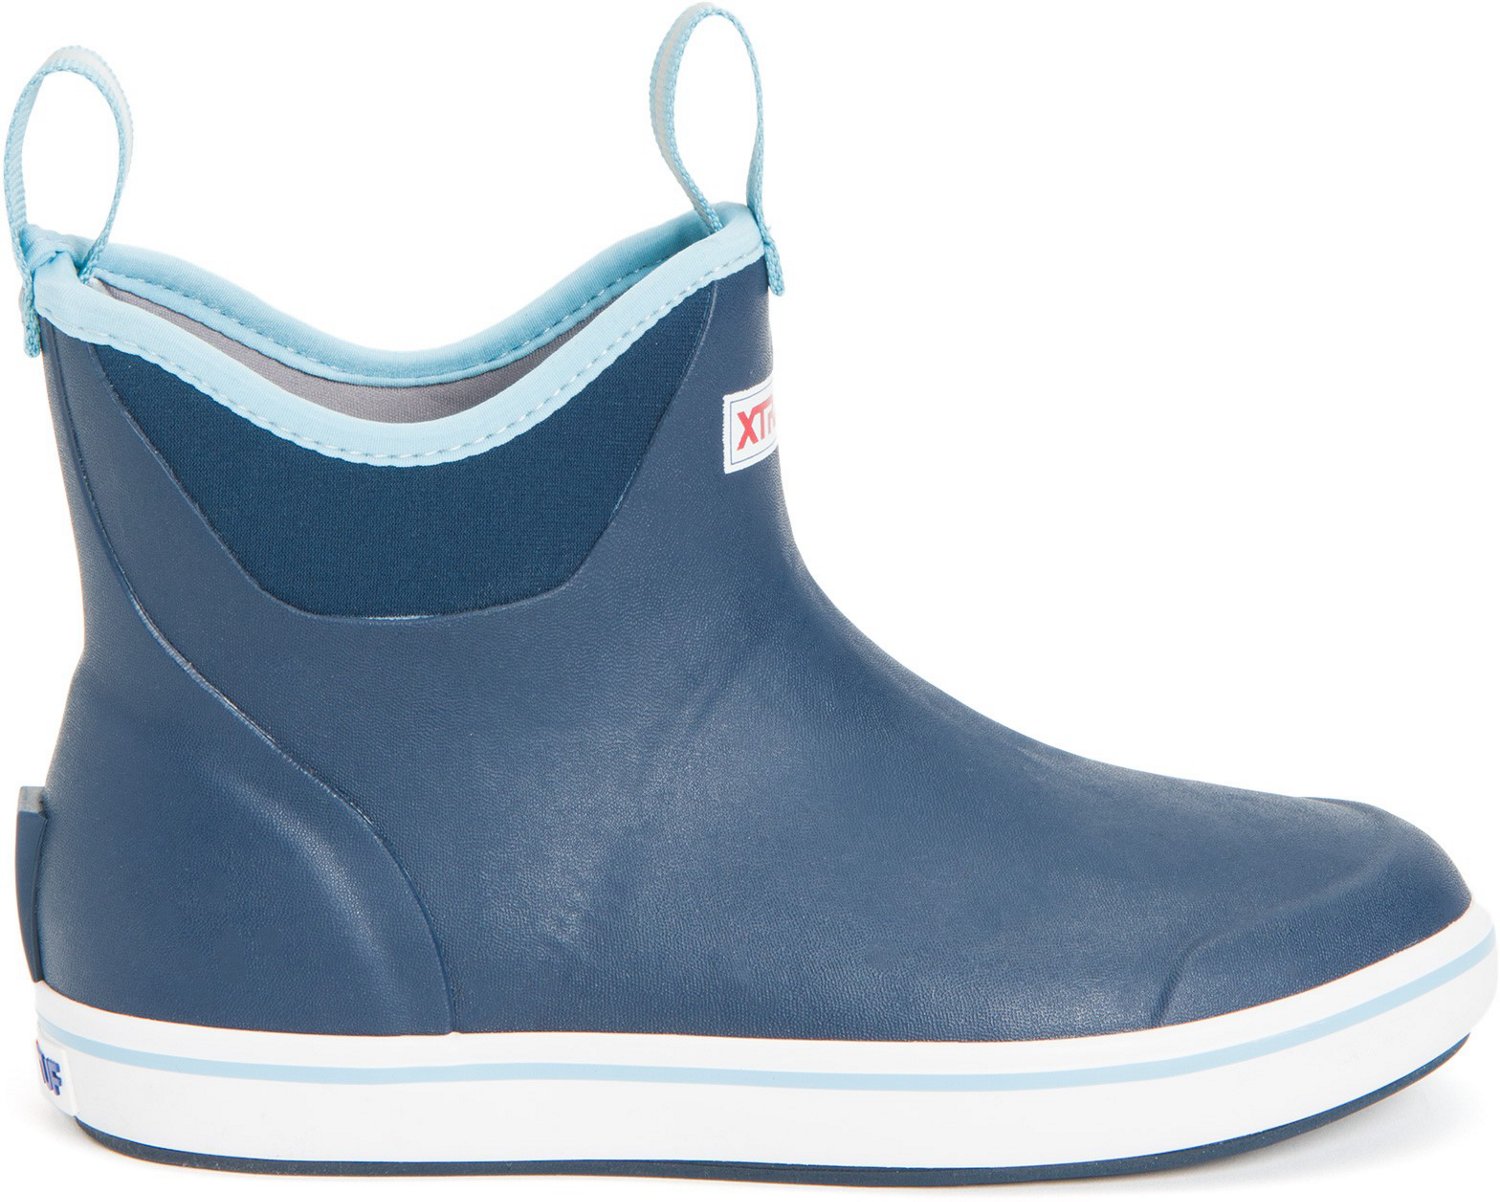 Xtratuf Women's 6 in. Ankle Deck Boots | Free Shipping at Academy